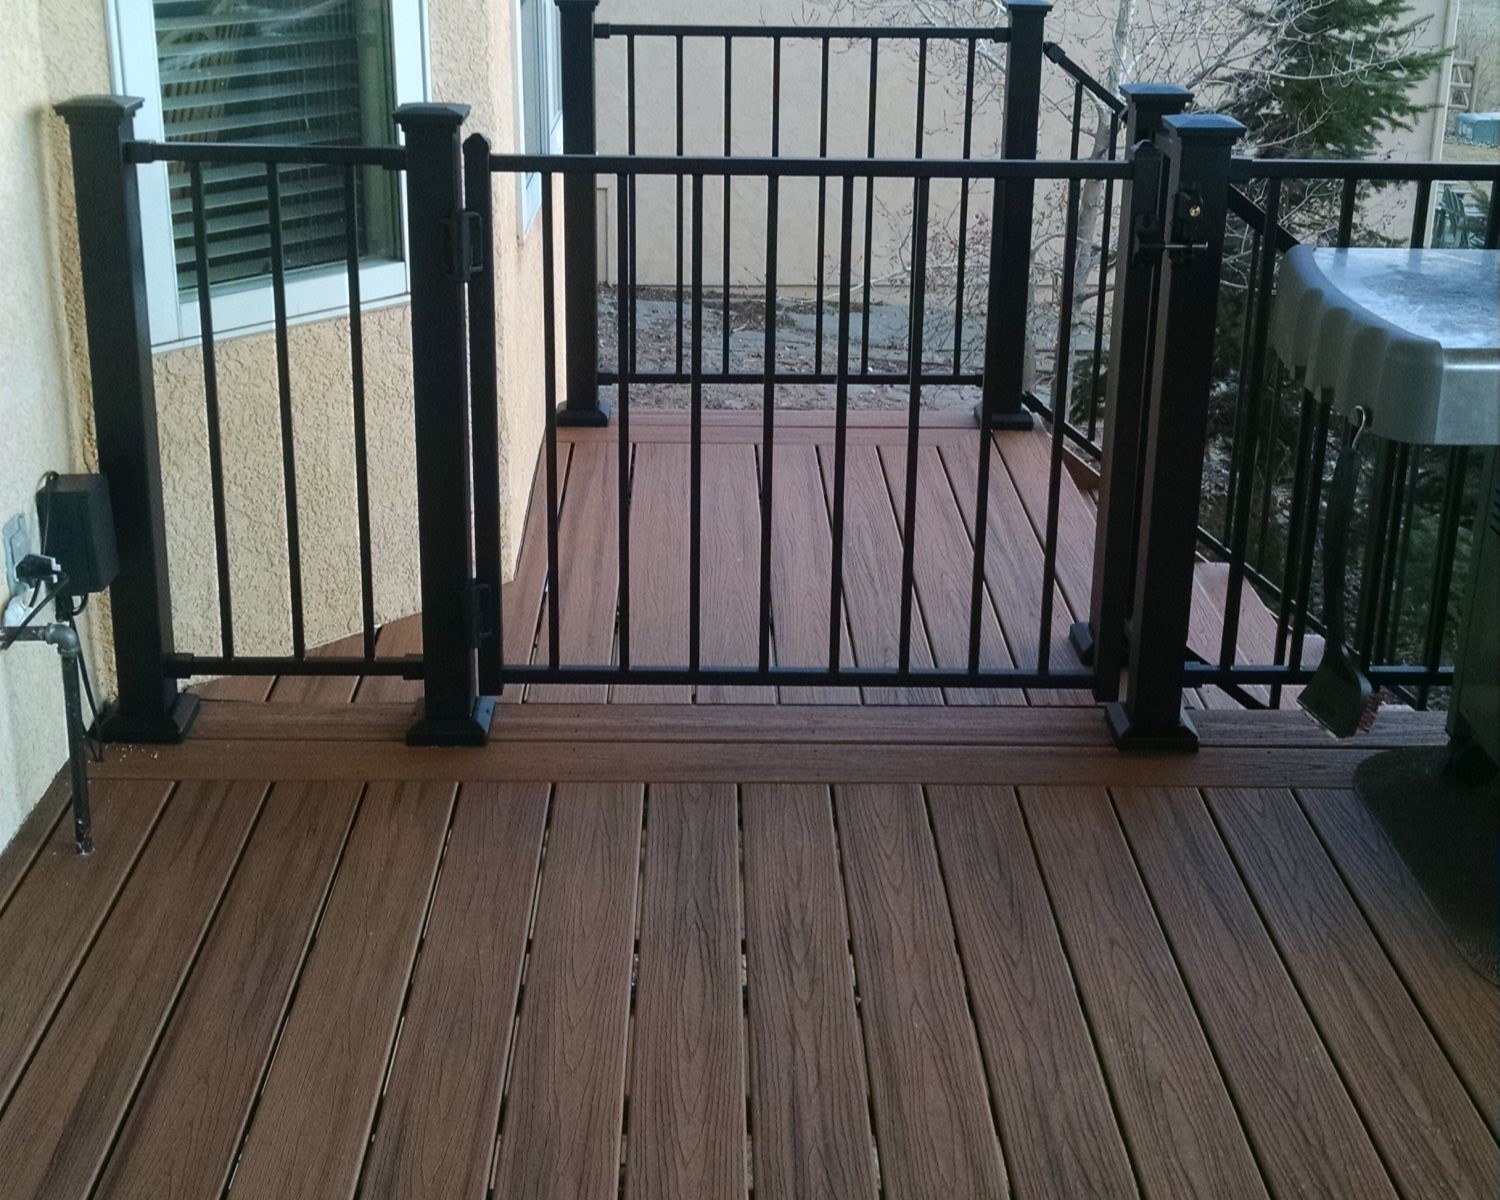 Custom deck featuring composite boards with double end and dividing boards. The railing is a metal panel system with gate installed at top of steps.